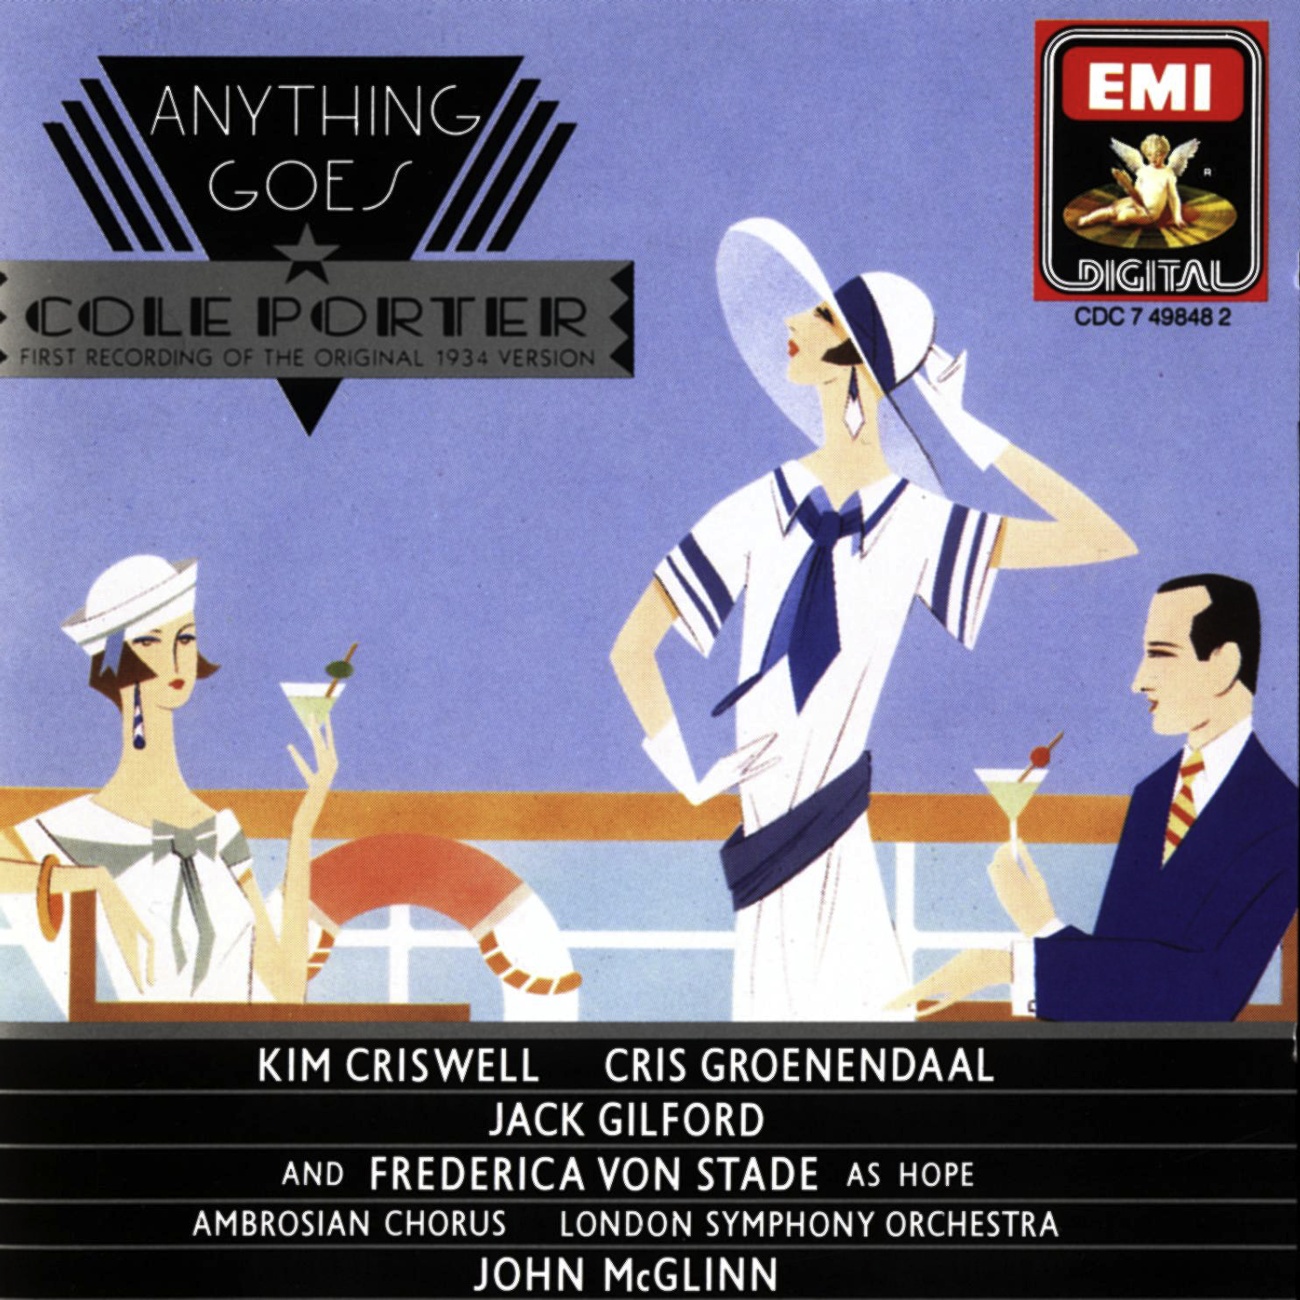 Anything Goes (original 1934 version), Act II: Be like the bluebird (Moonface)